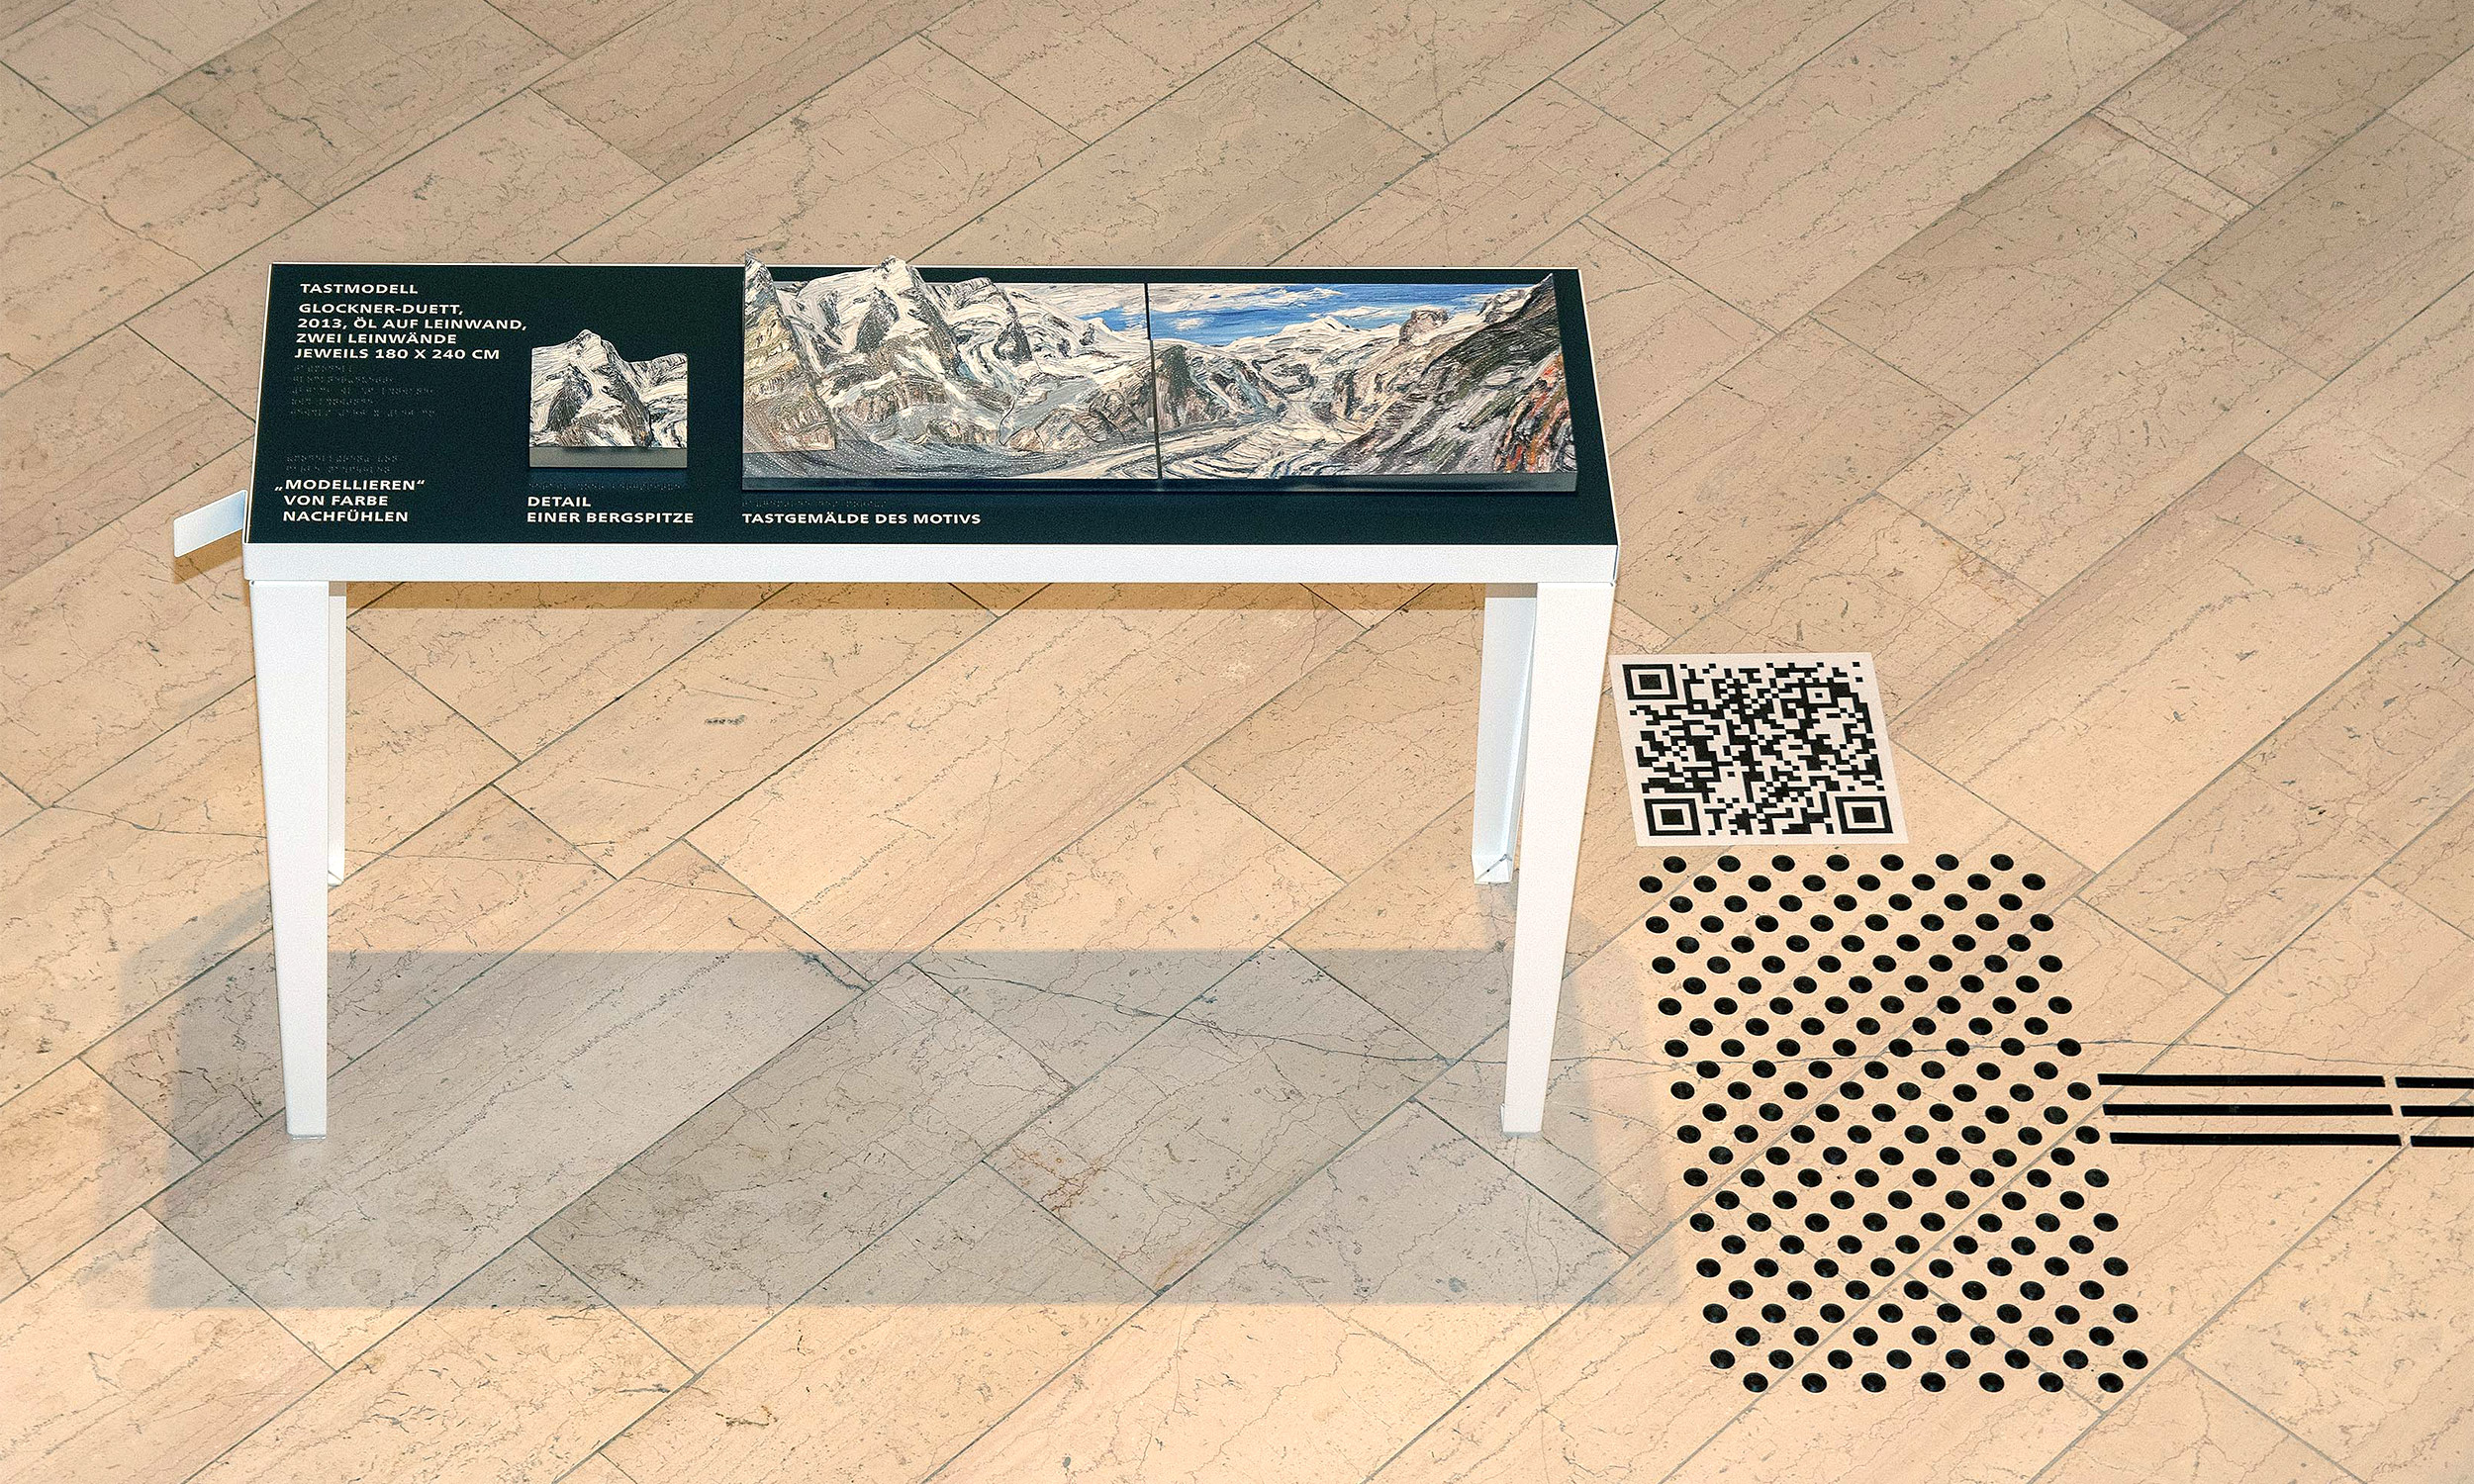 View from above of the entire table with tactile model for the painting "Bergwelten". On the right is an attention field and a QR code.